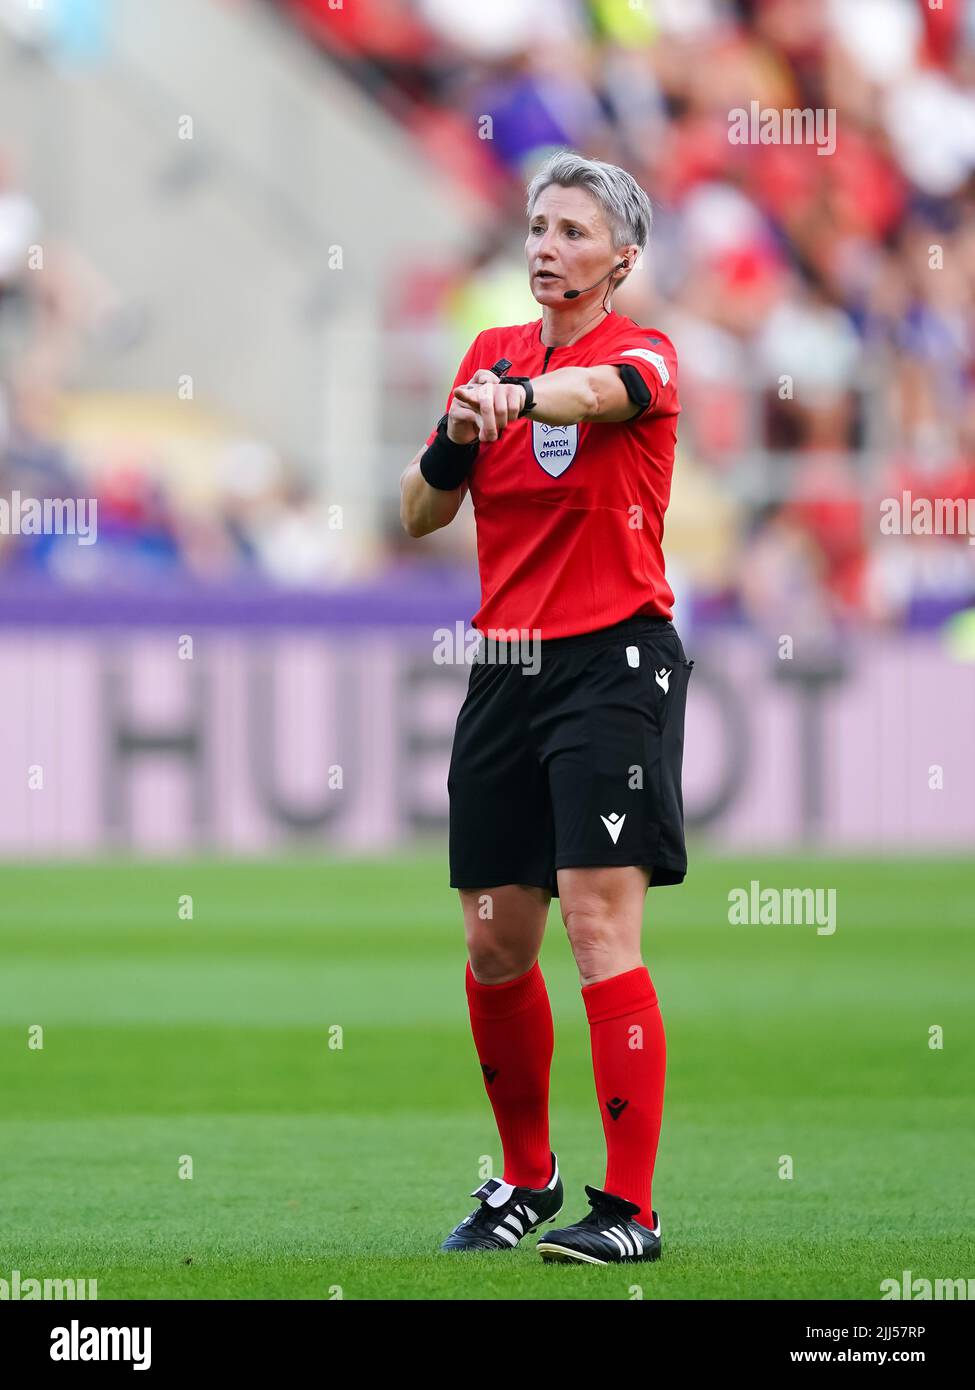 Referee Jana Adamkova (CZE) gestures during the UEFA Womens Euro 2022 group D football match between Iceland and France at New York Stadium in Rotherham, England. (Foto: Daniela Porcelli/Sports Press Photo/C - ONE HOUR DEADLINE - ONLY ACTIVATE FTP IF IMAGES LESS THAN ONE HOUR OLD - Alamy) Stock Photo